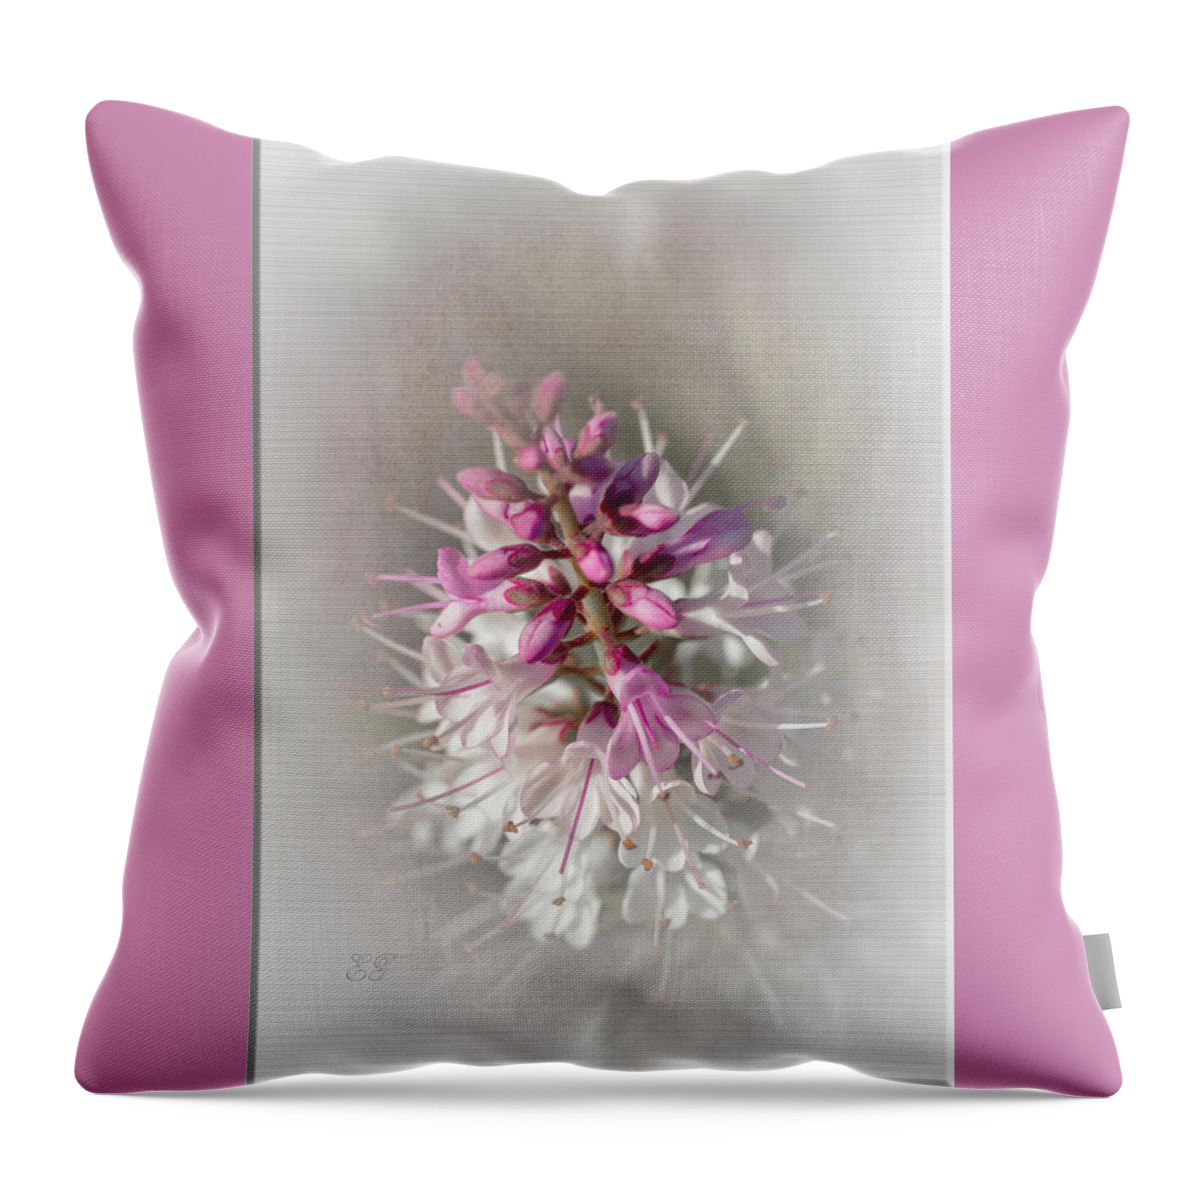 Flowers Throw Pillow featuring the photograph Hebe by Elaine Teague